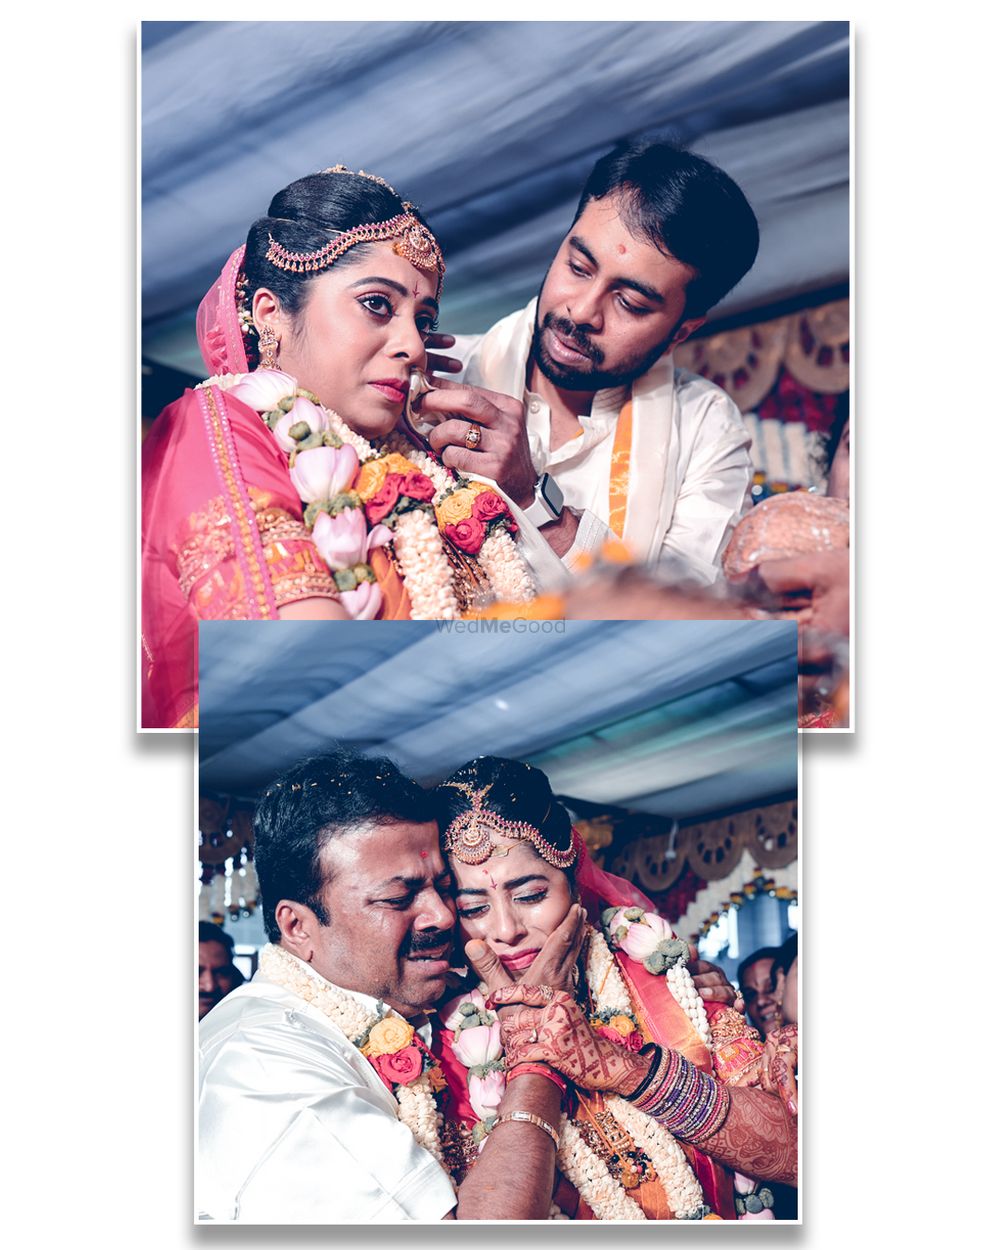 Photo From Kunal & Anuja - By CLICKTECH PRODUCTIONS